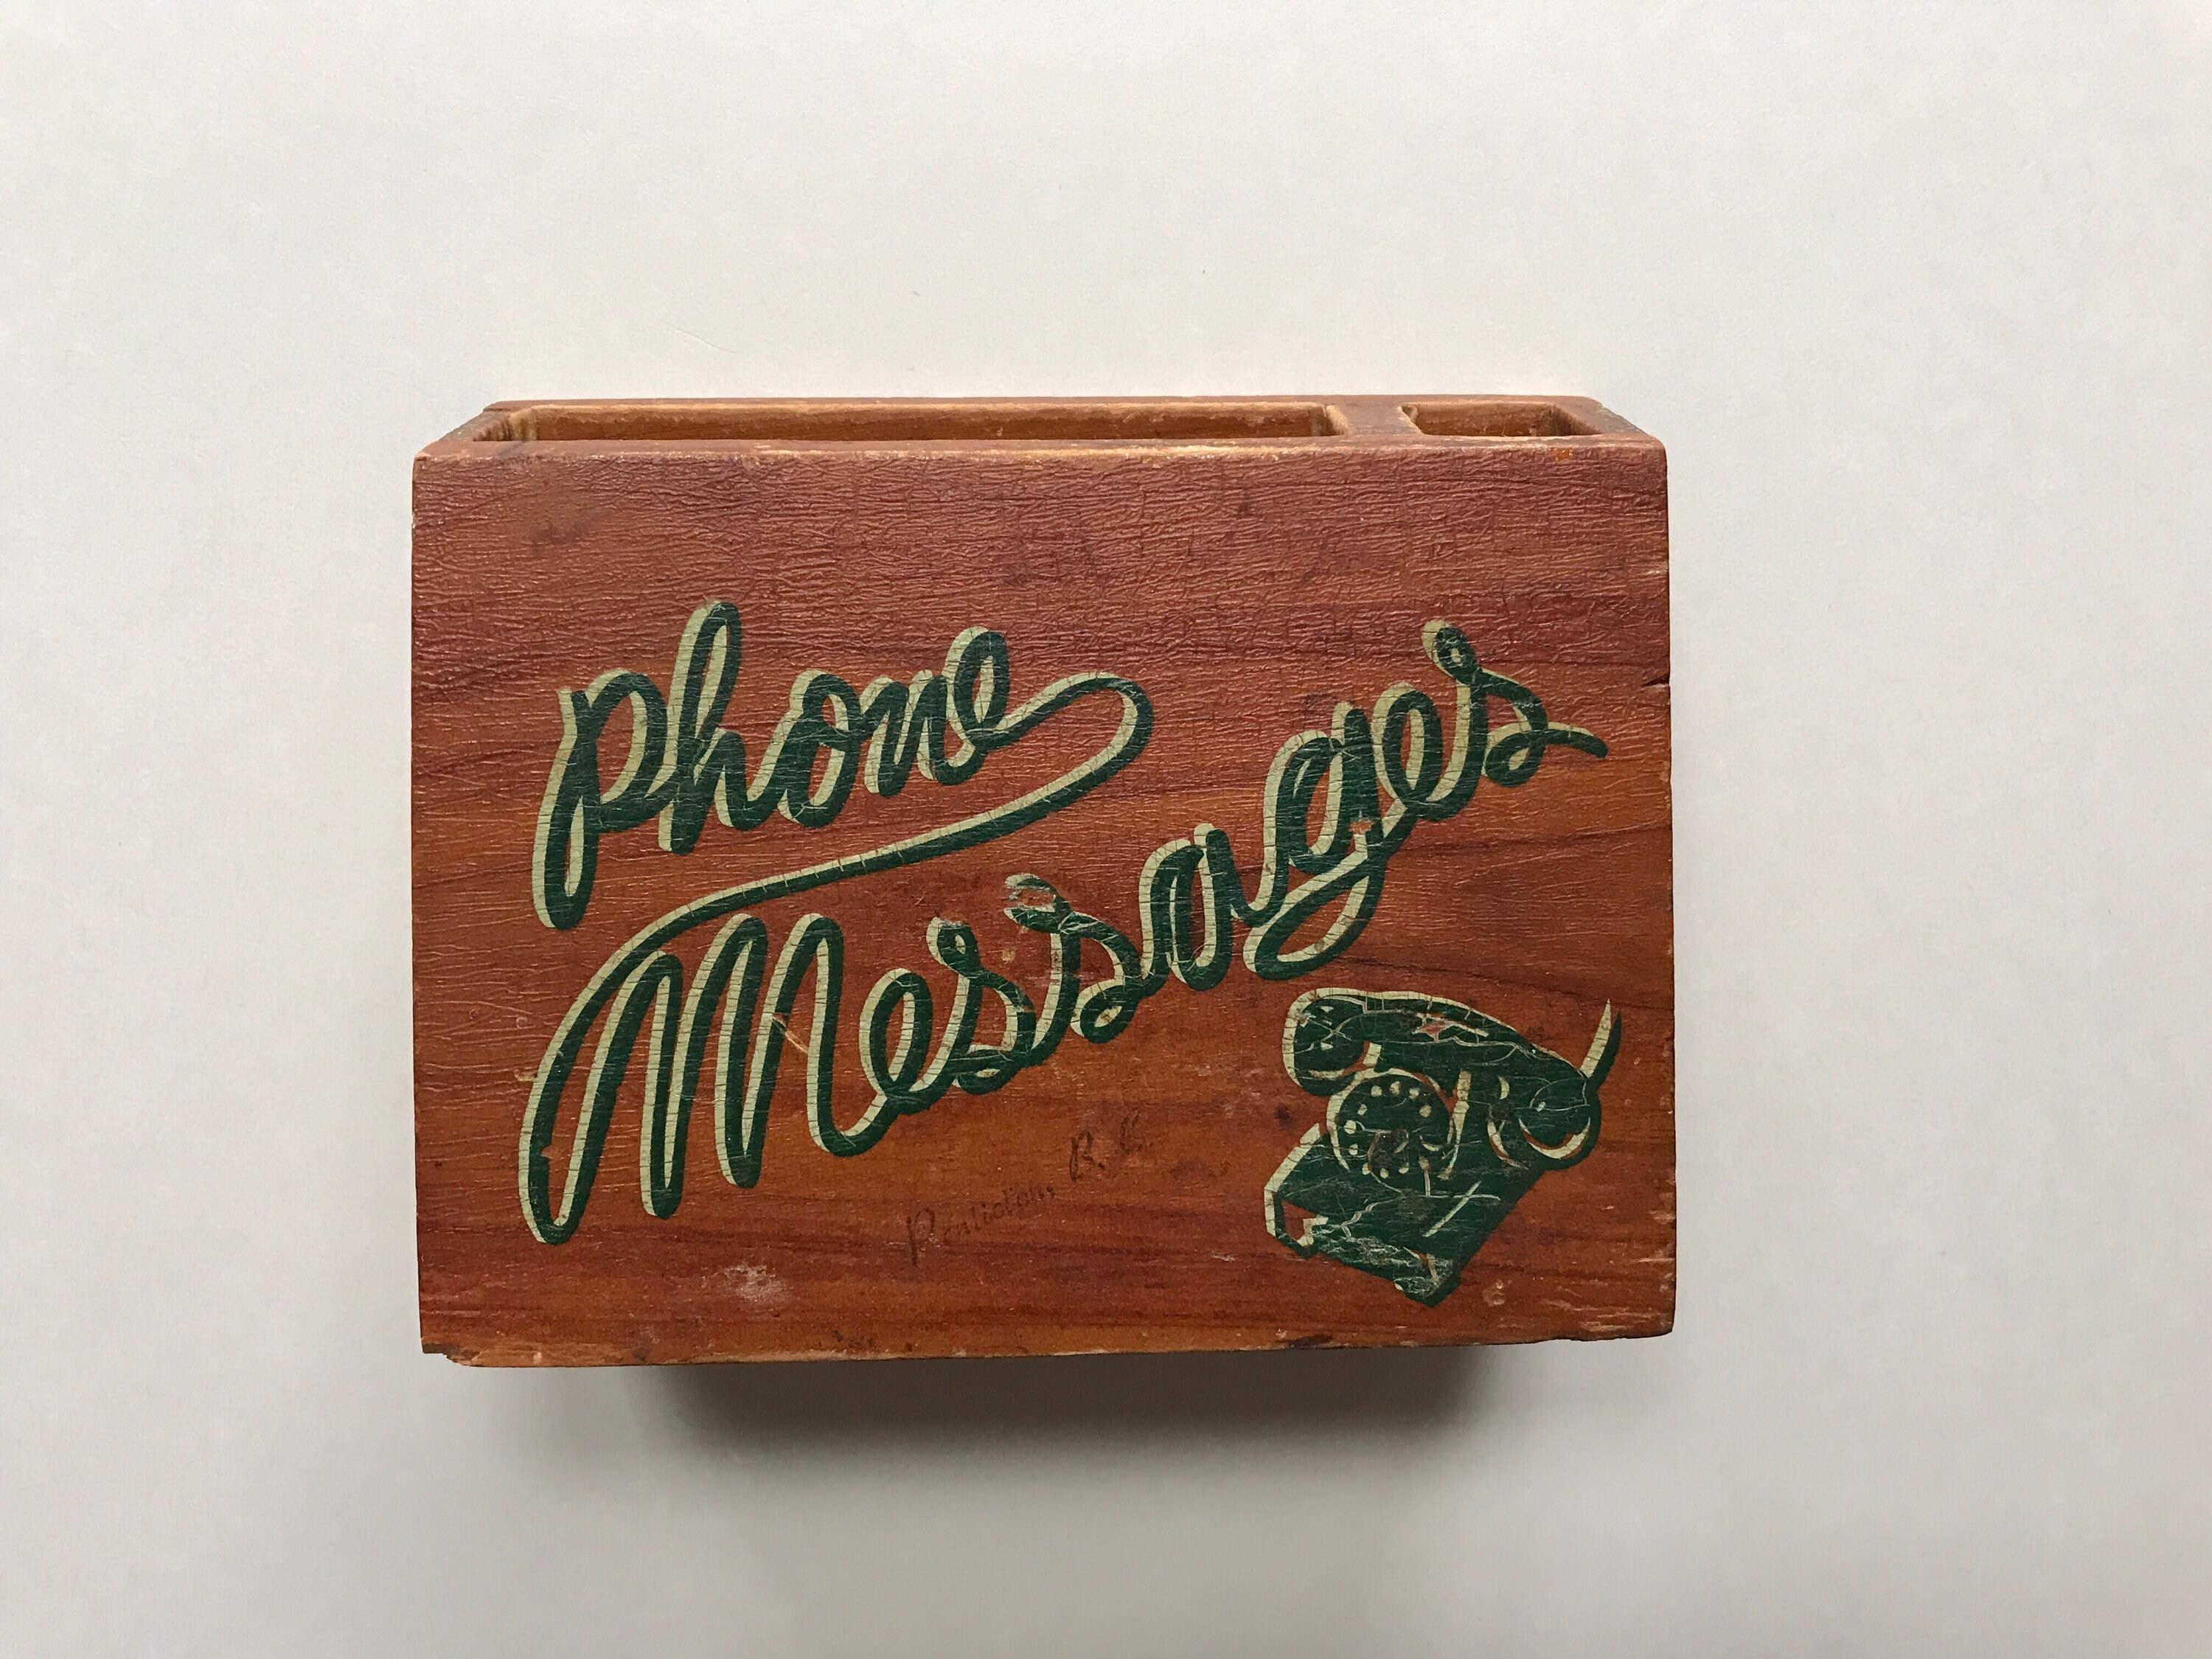 Vintage Phone Messages Pen and Note Pad Holder Wooden Made in USA Cute 70s 80s Home Decor Office Desk